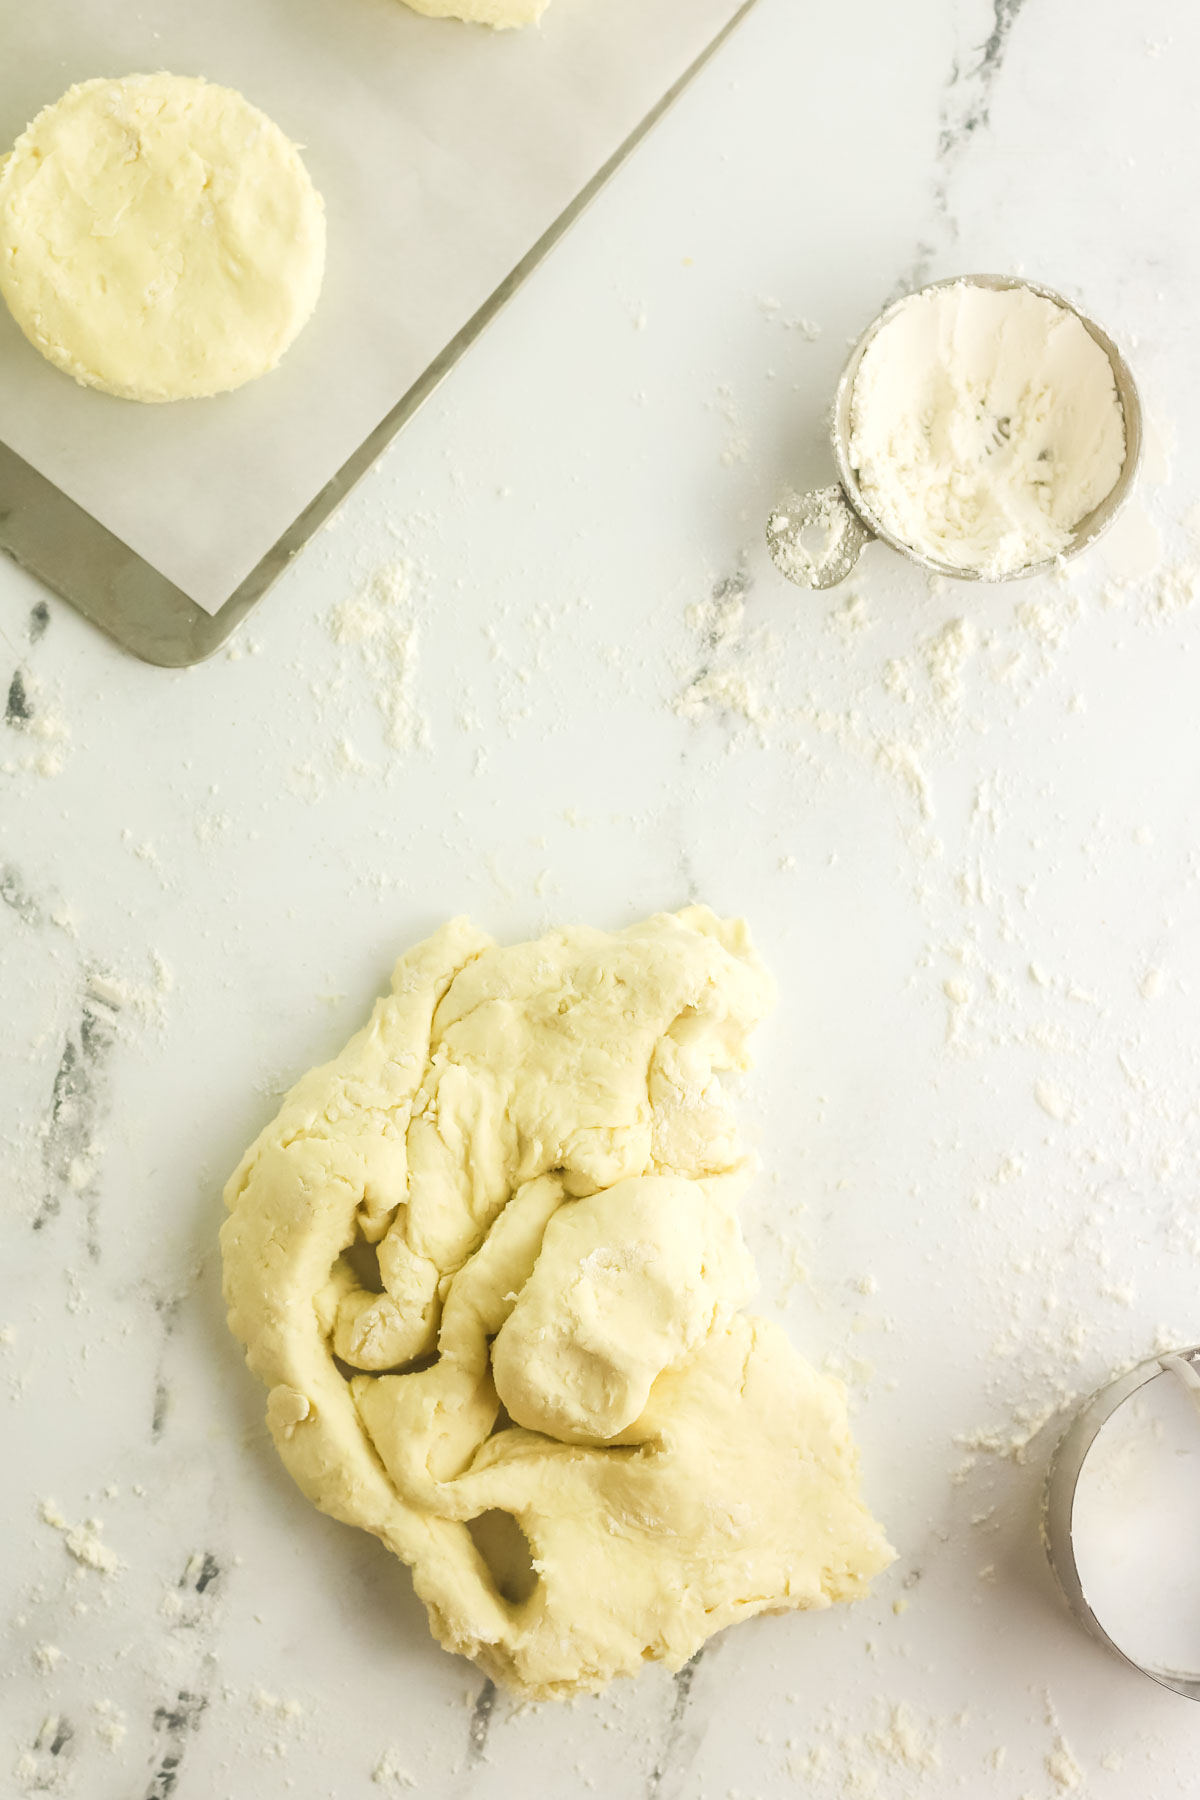 biscuit dough scraps pushed together